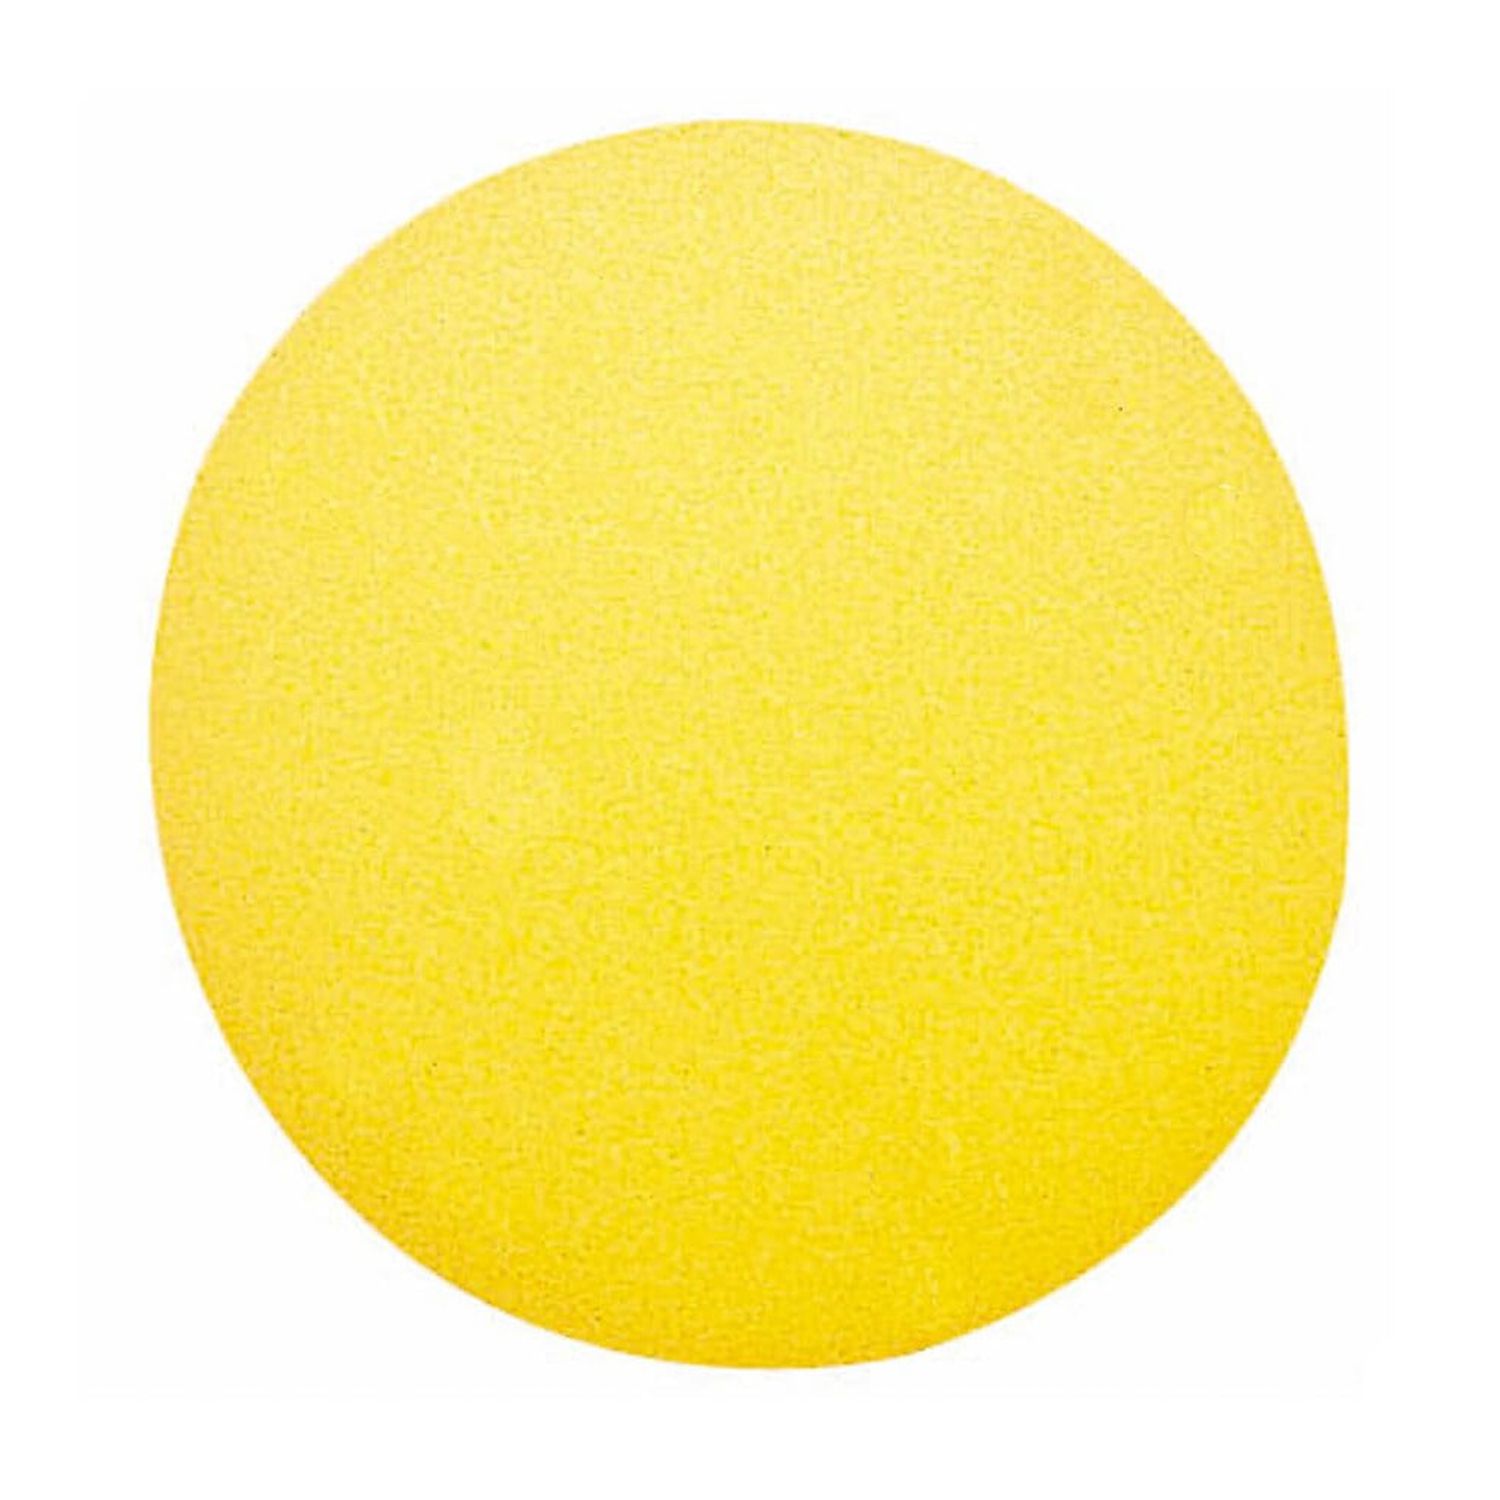 Dick Martin Sports MASFBY4-12 Foam Ball 4 Uncoated, Yellow - 12 Each - image 2 of 2